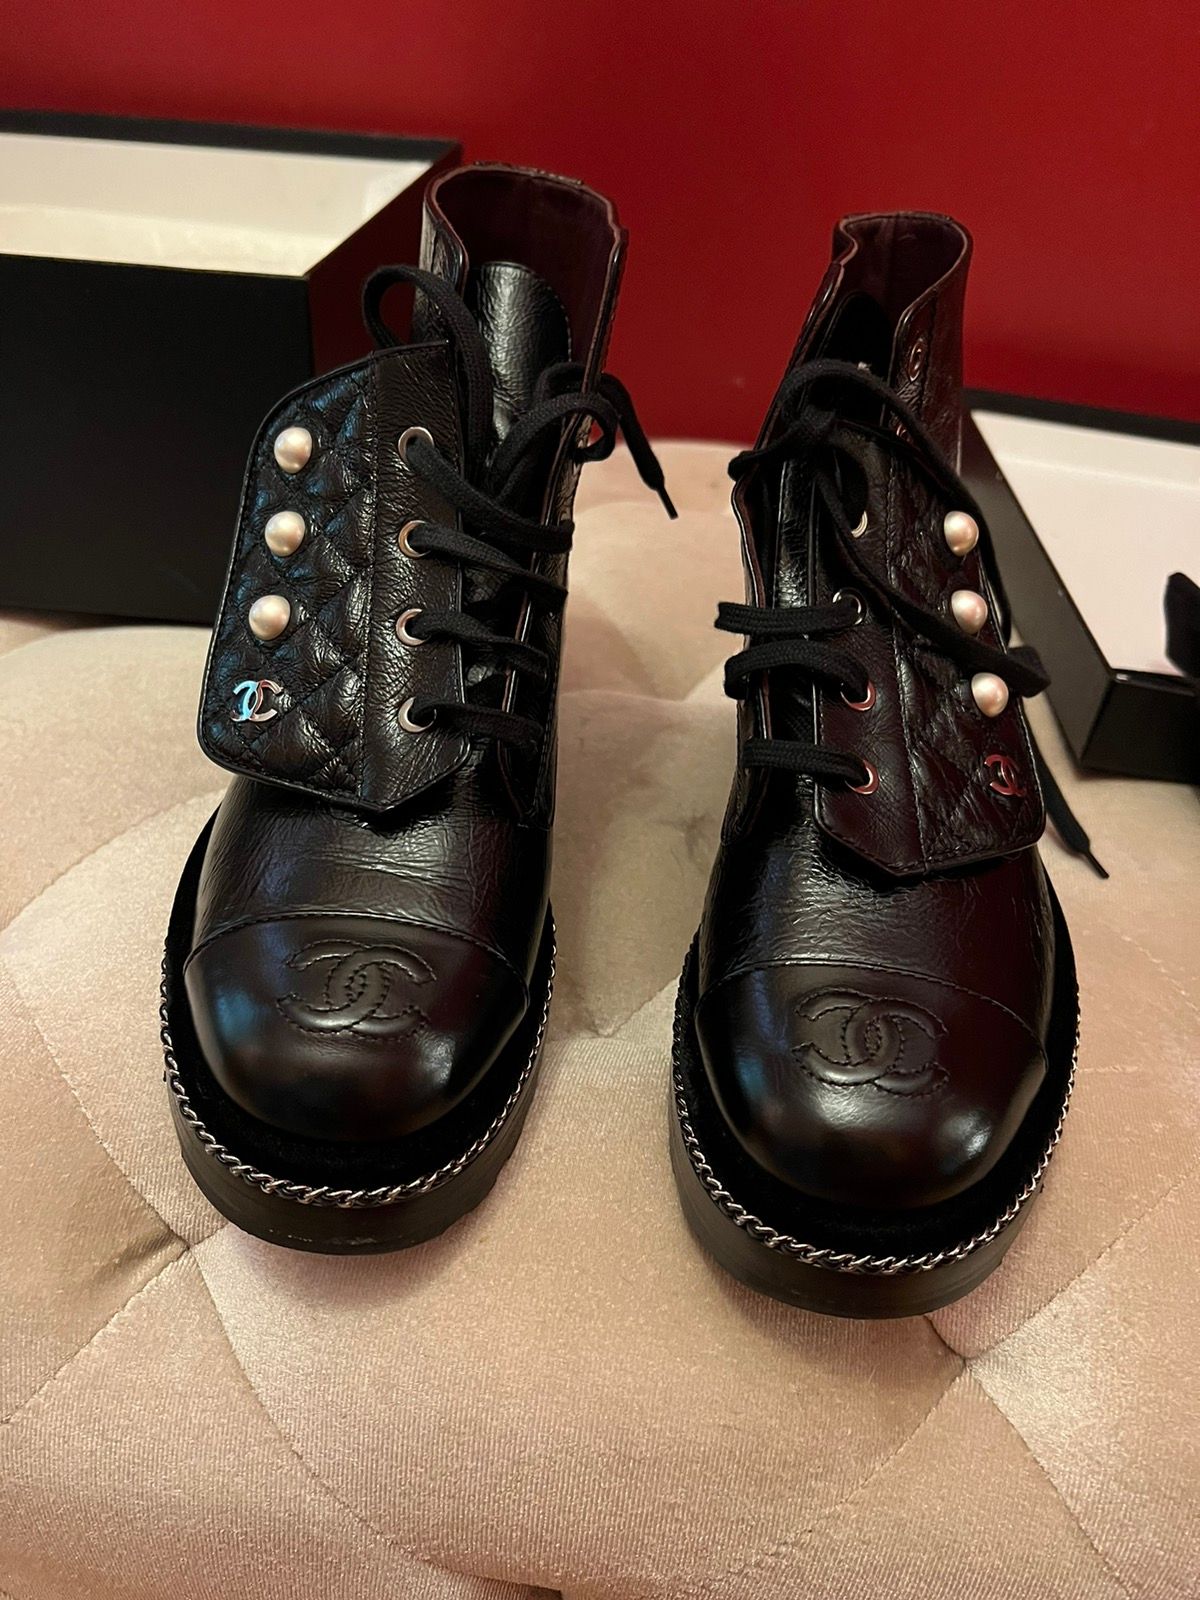 Chanel Combat boots w pearls